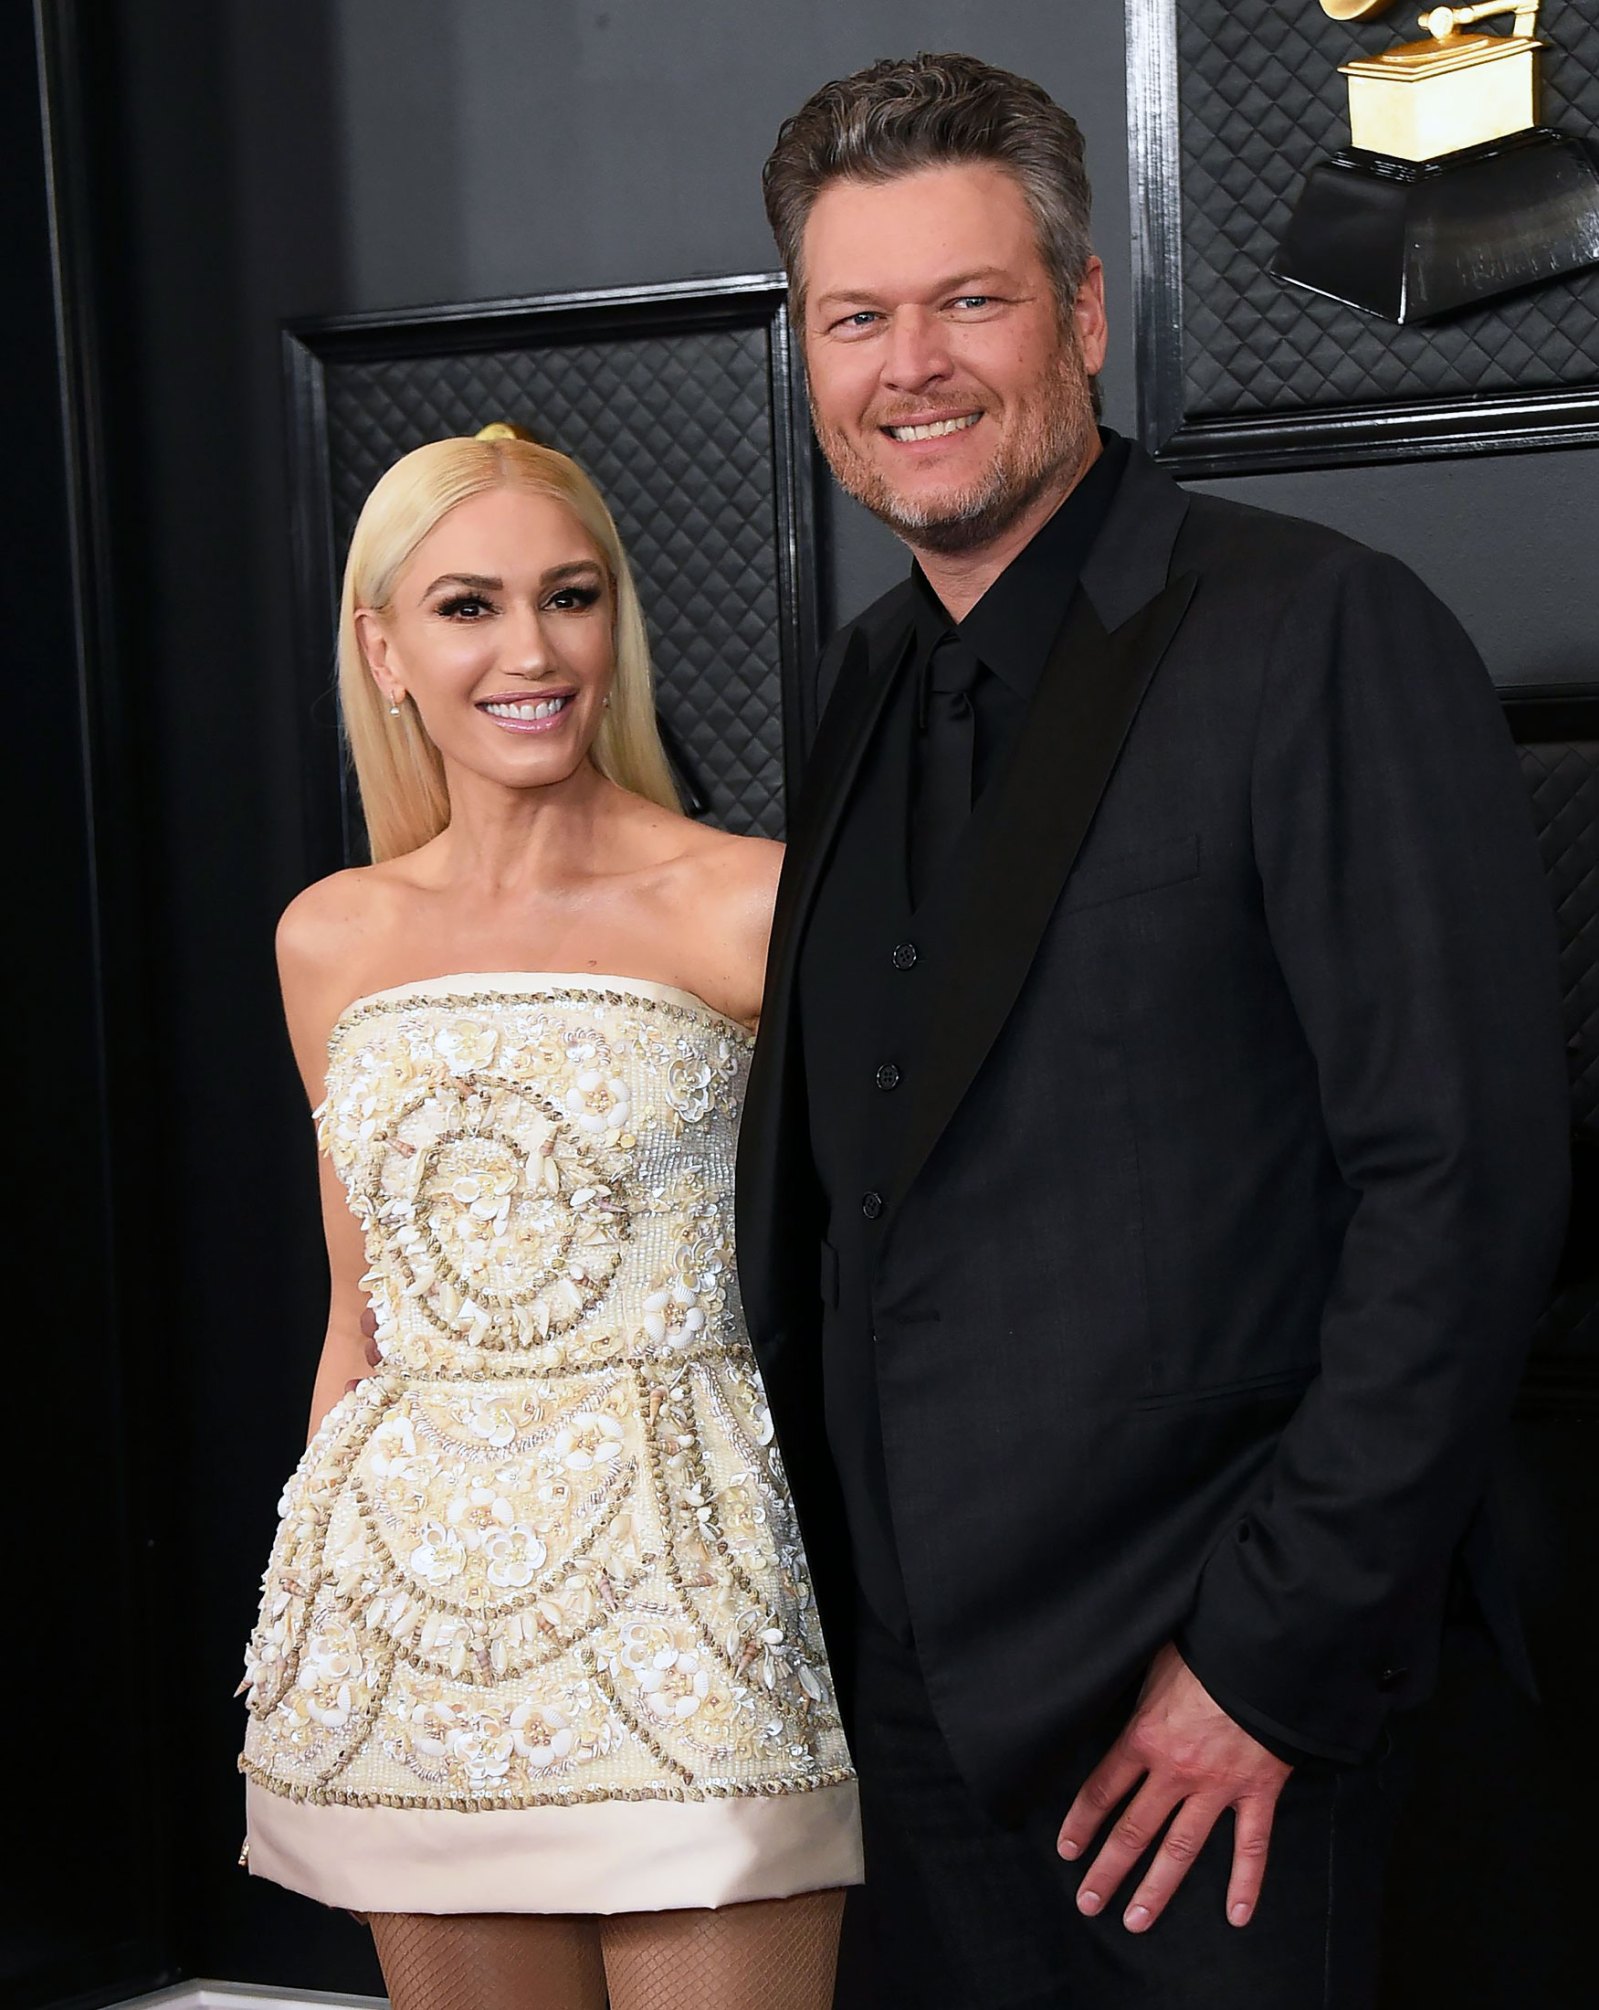 Here Comes The Bride! Everything Blake and Gwen Said About Their Wedding